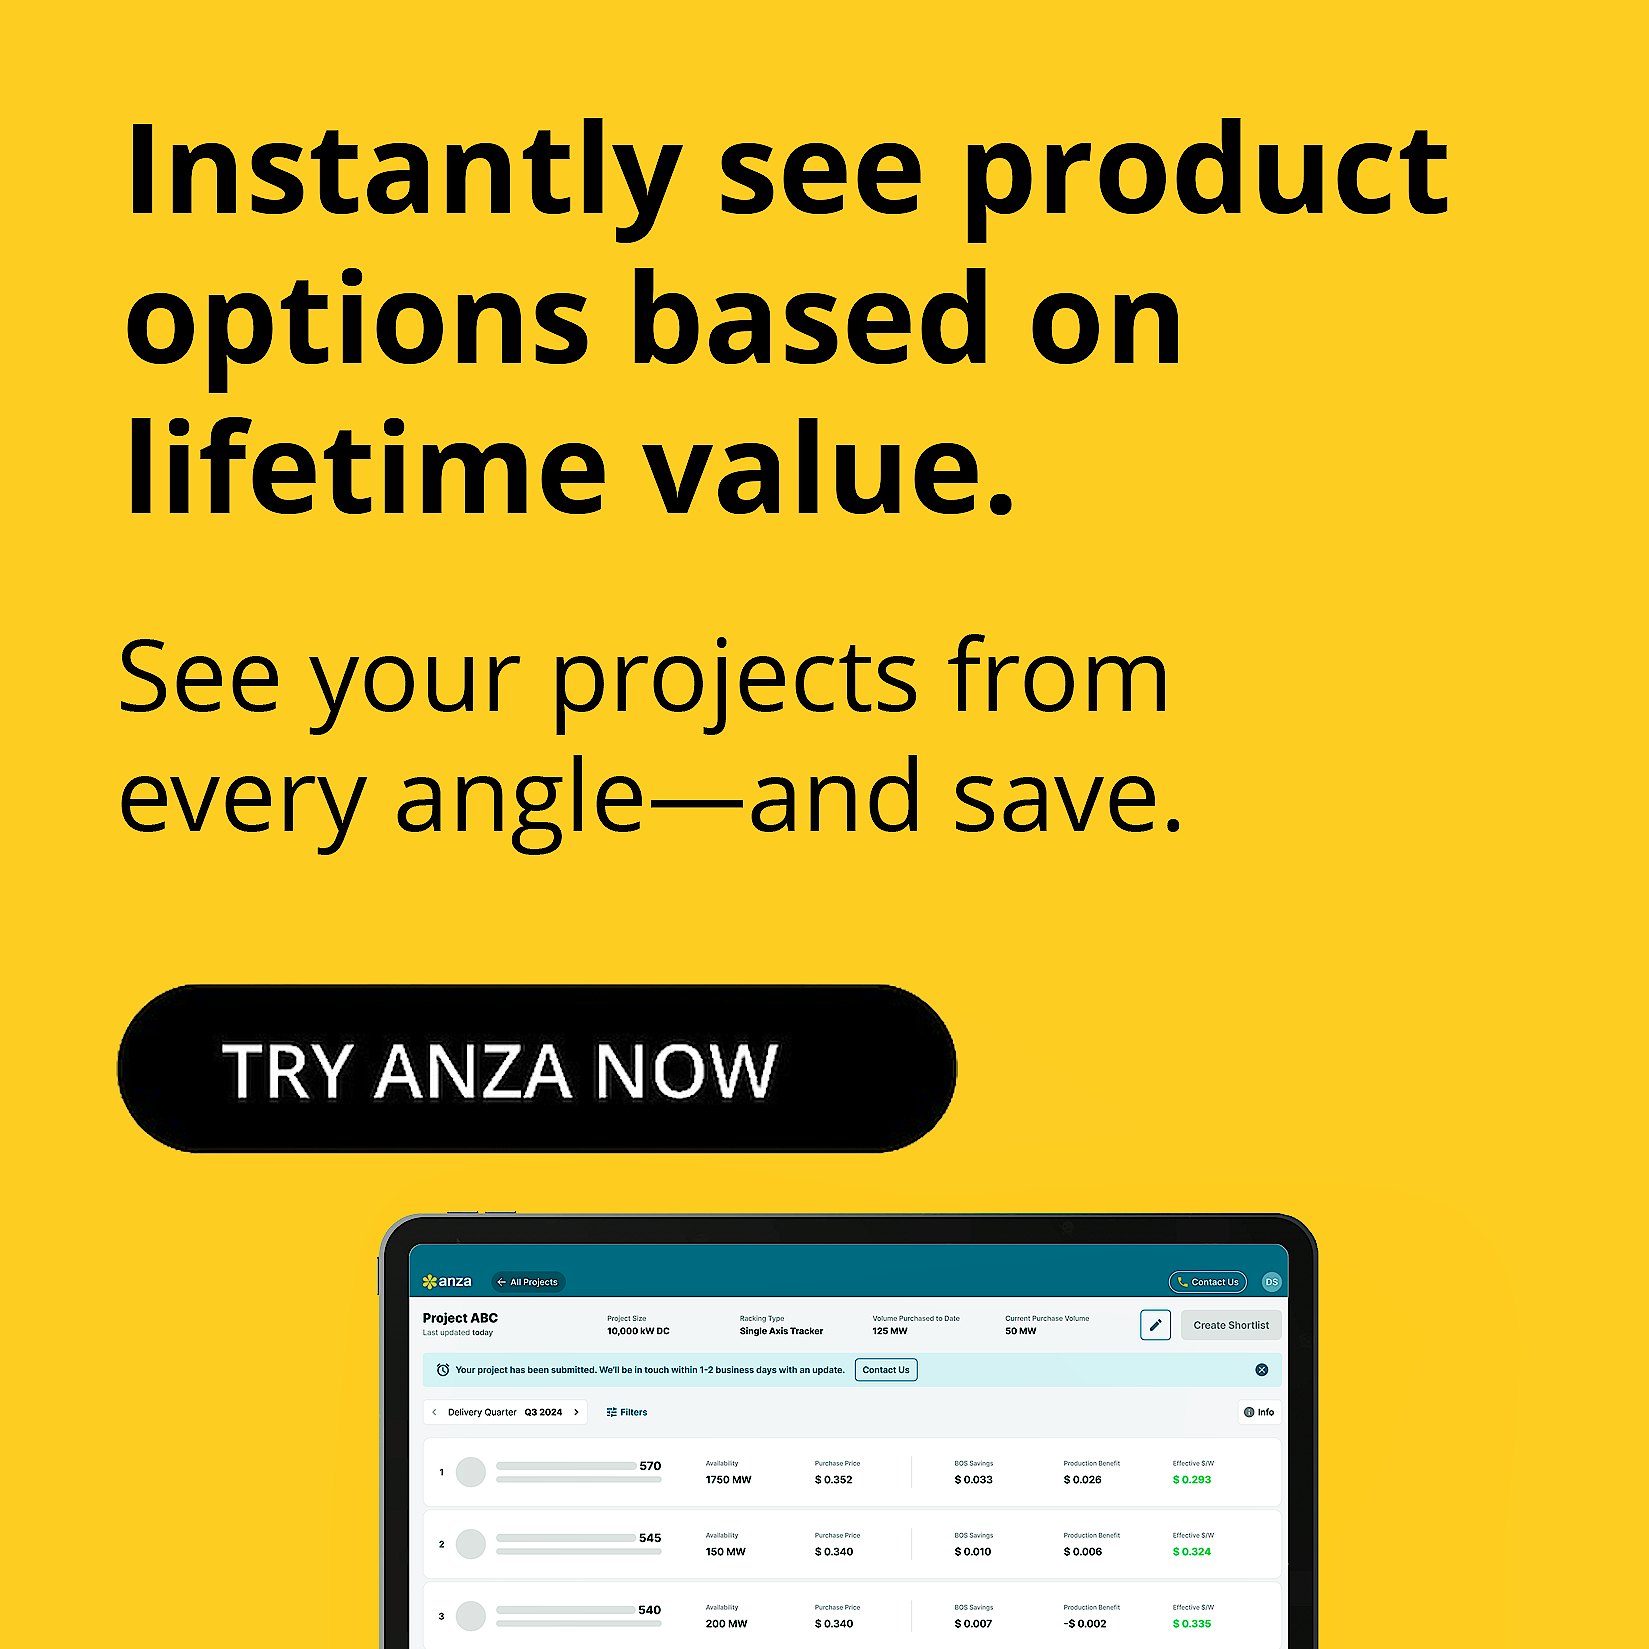 Anza Launches New Platform to Accelerate the Speed and Volume of Solar and Storage Projects Deployed Amidst Record Demand for Renewable Energy